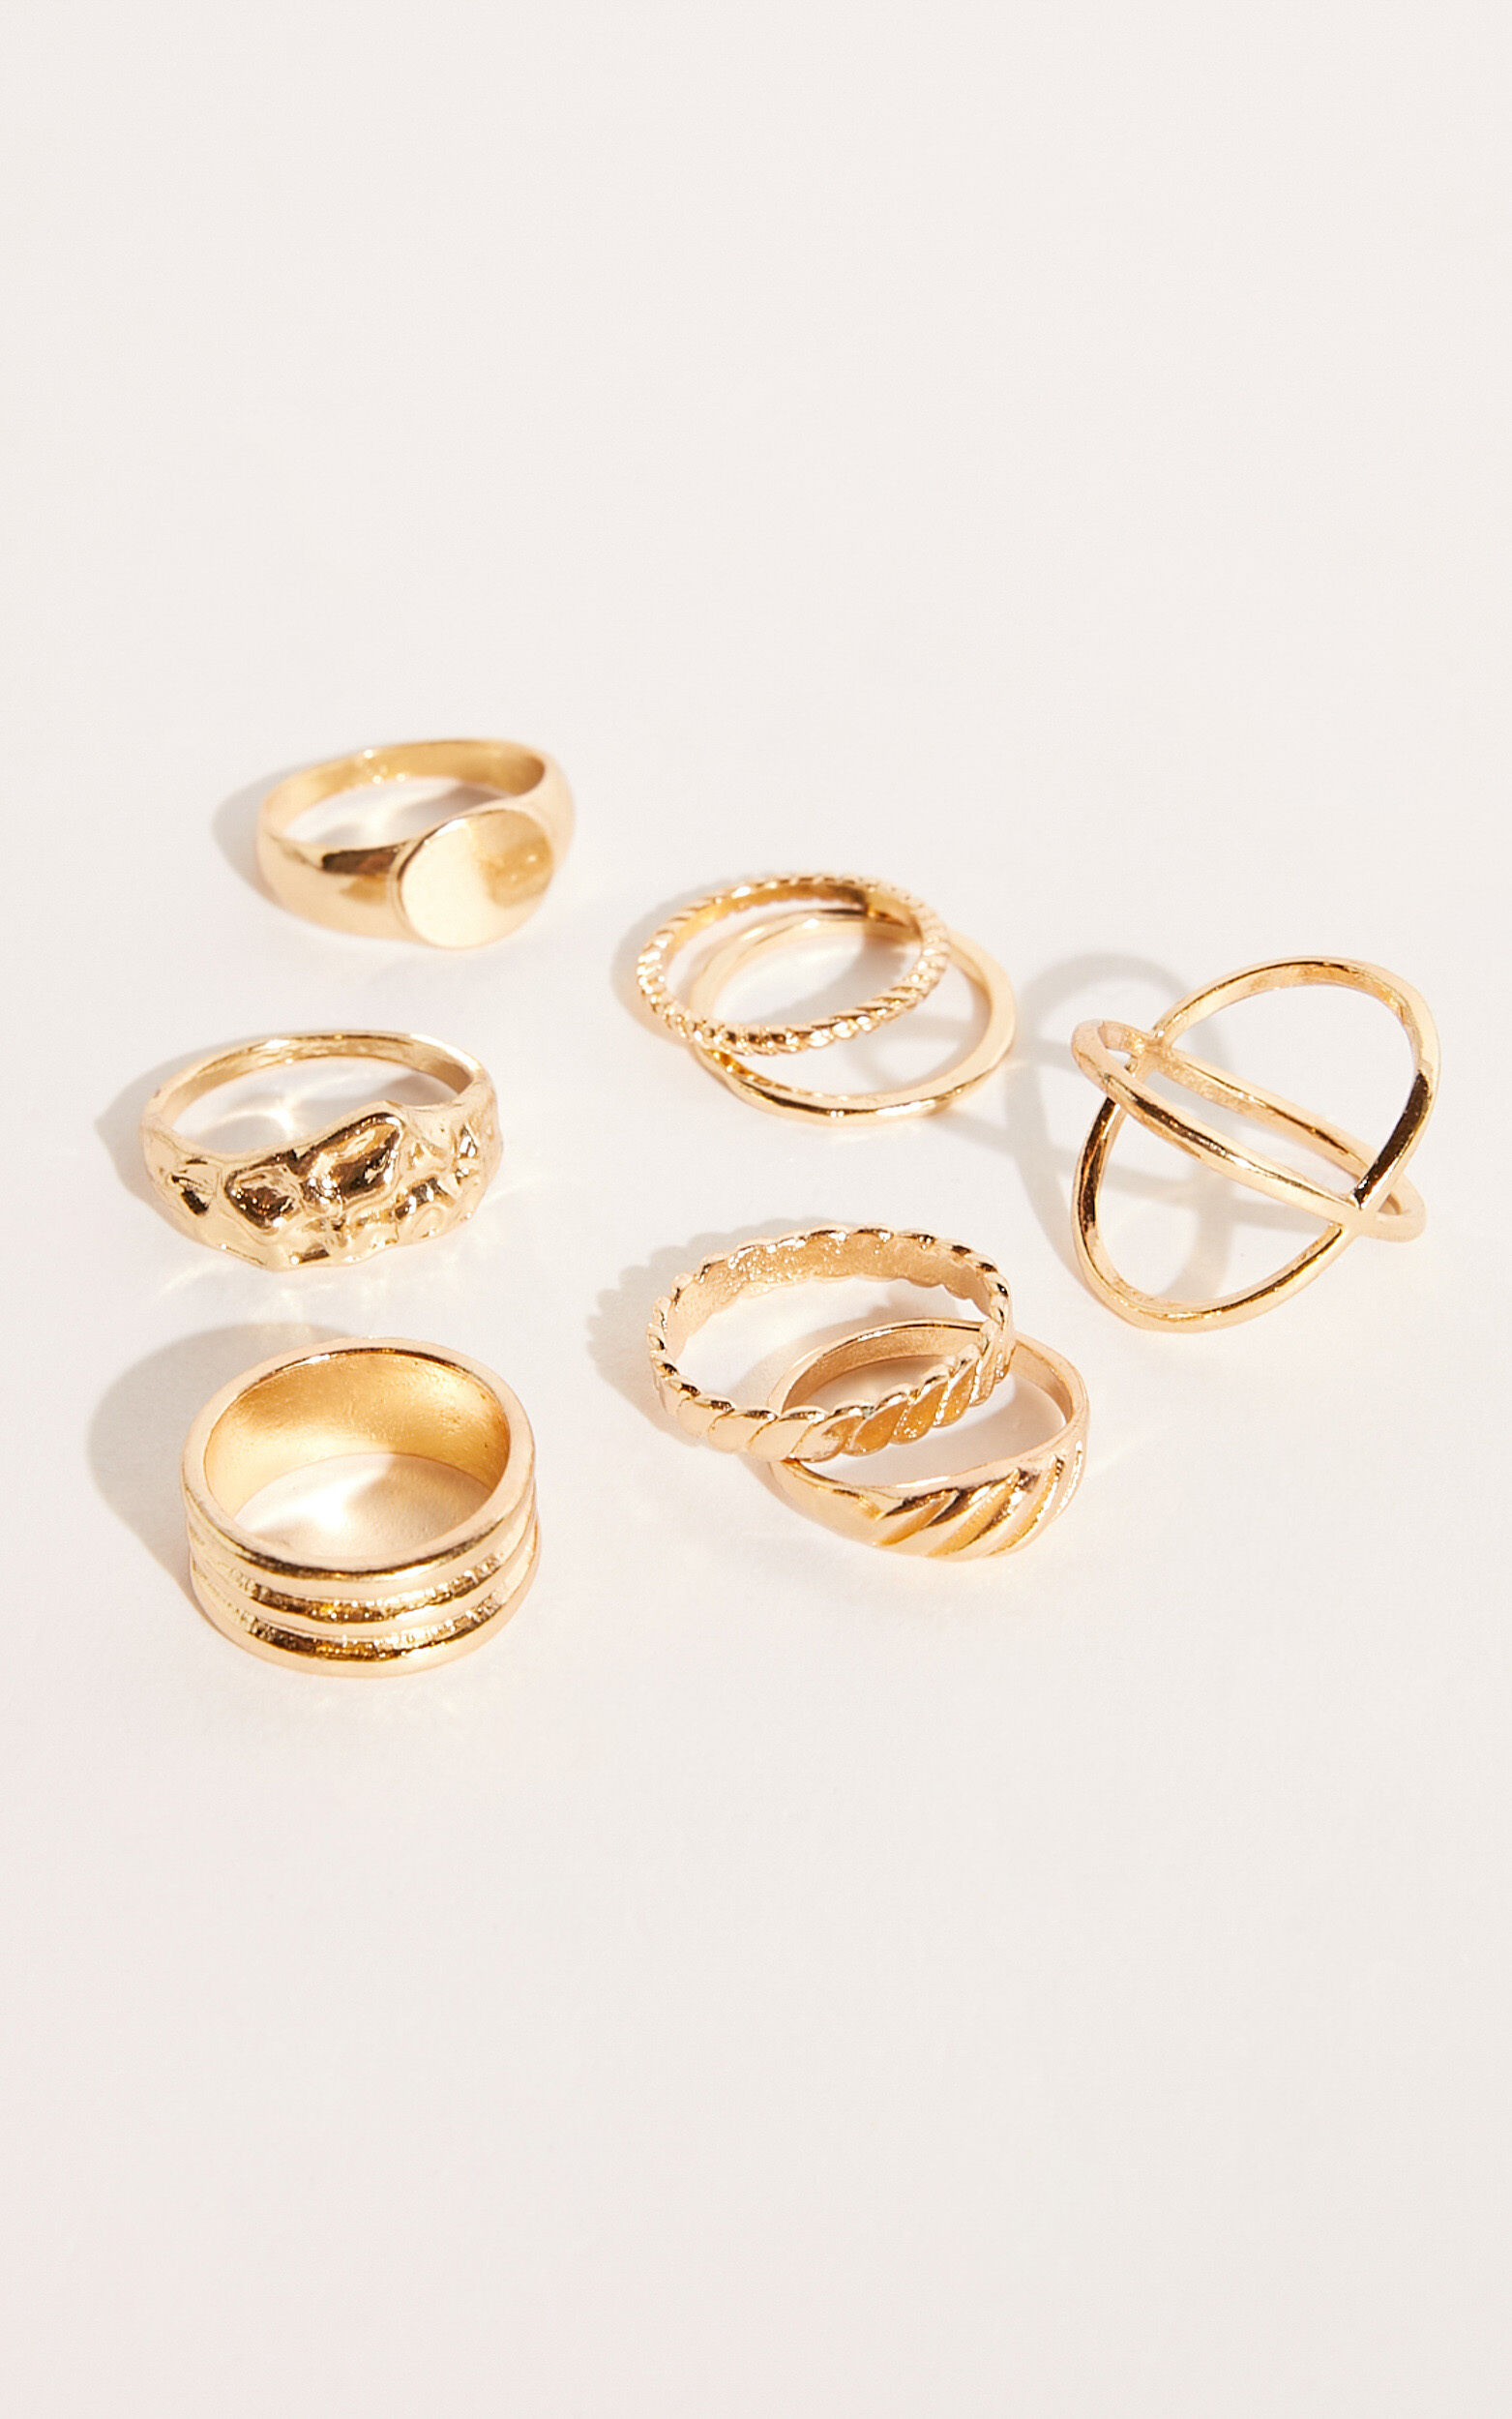 Aizhia Mixed Signet Ring Set - Pack of 8 in Gold - NoSize, GLD1